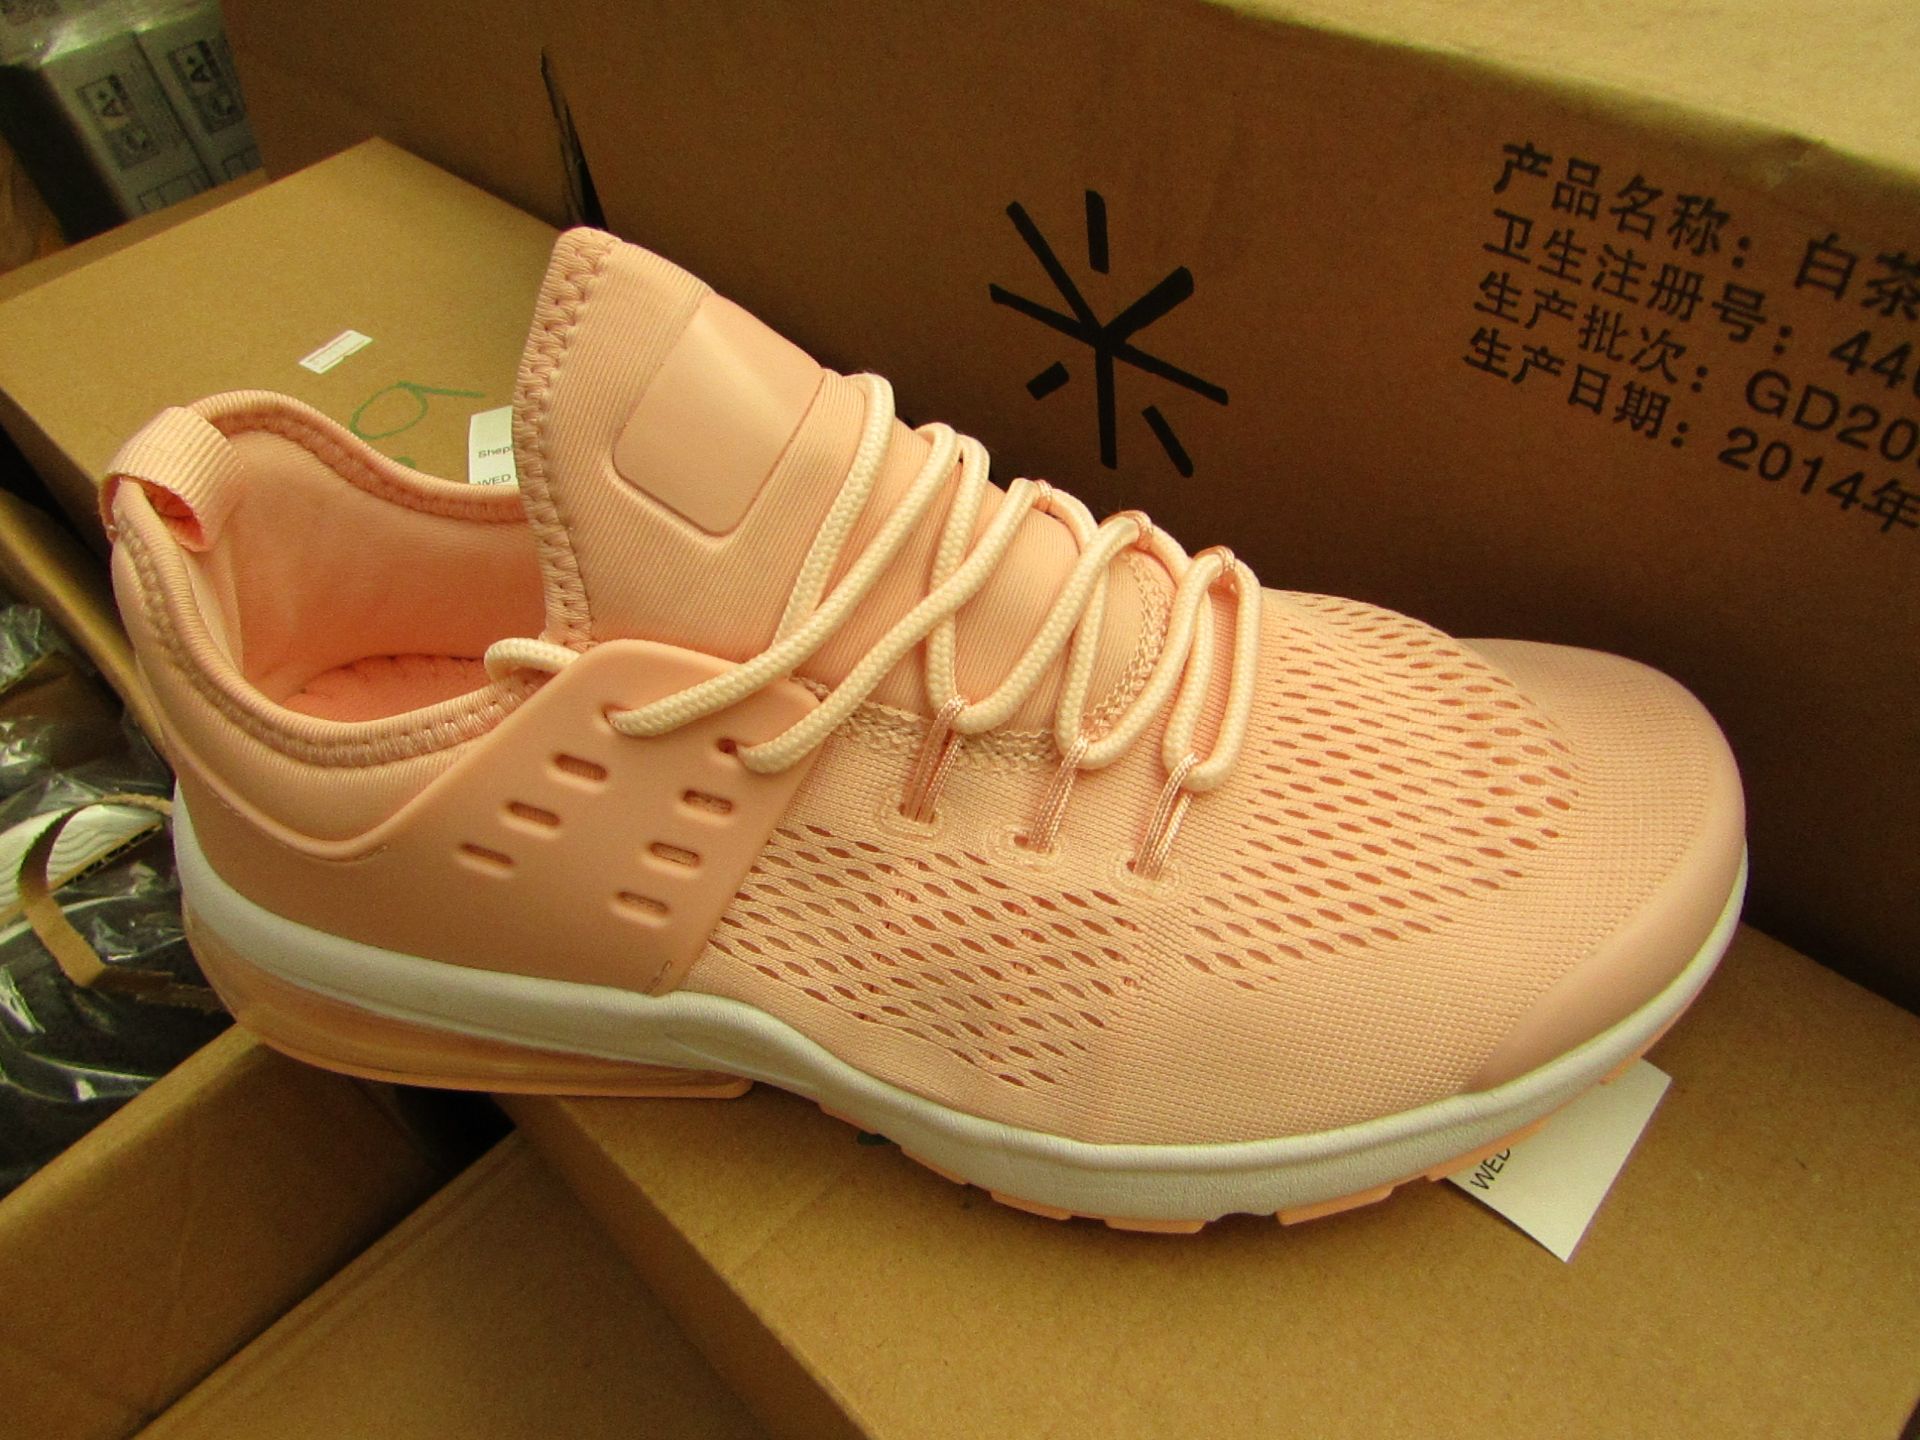 Pink Running Trainers, S37 New and boxed.